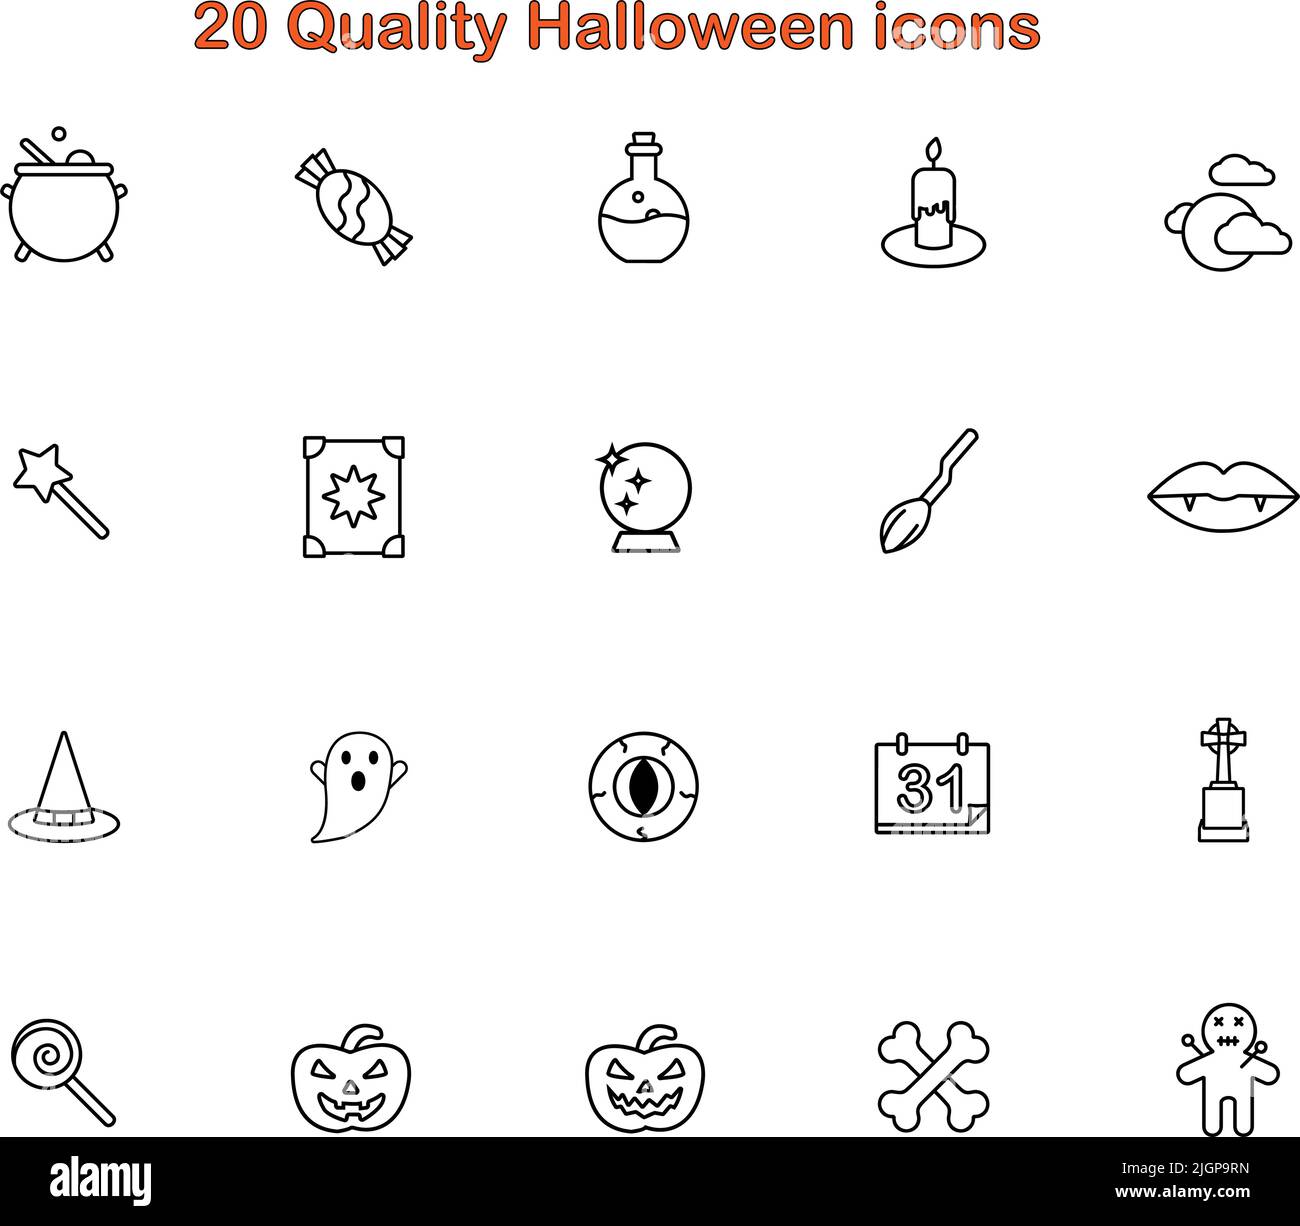 Halloween icons set. 20 Quality icons outline style Stock Vector